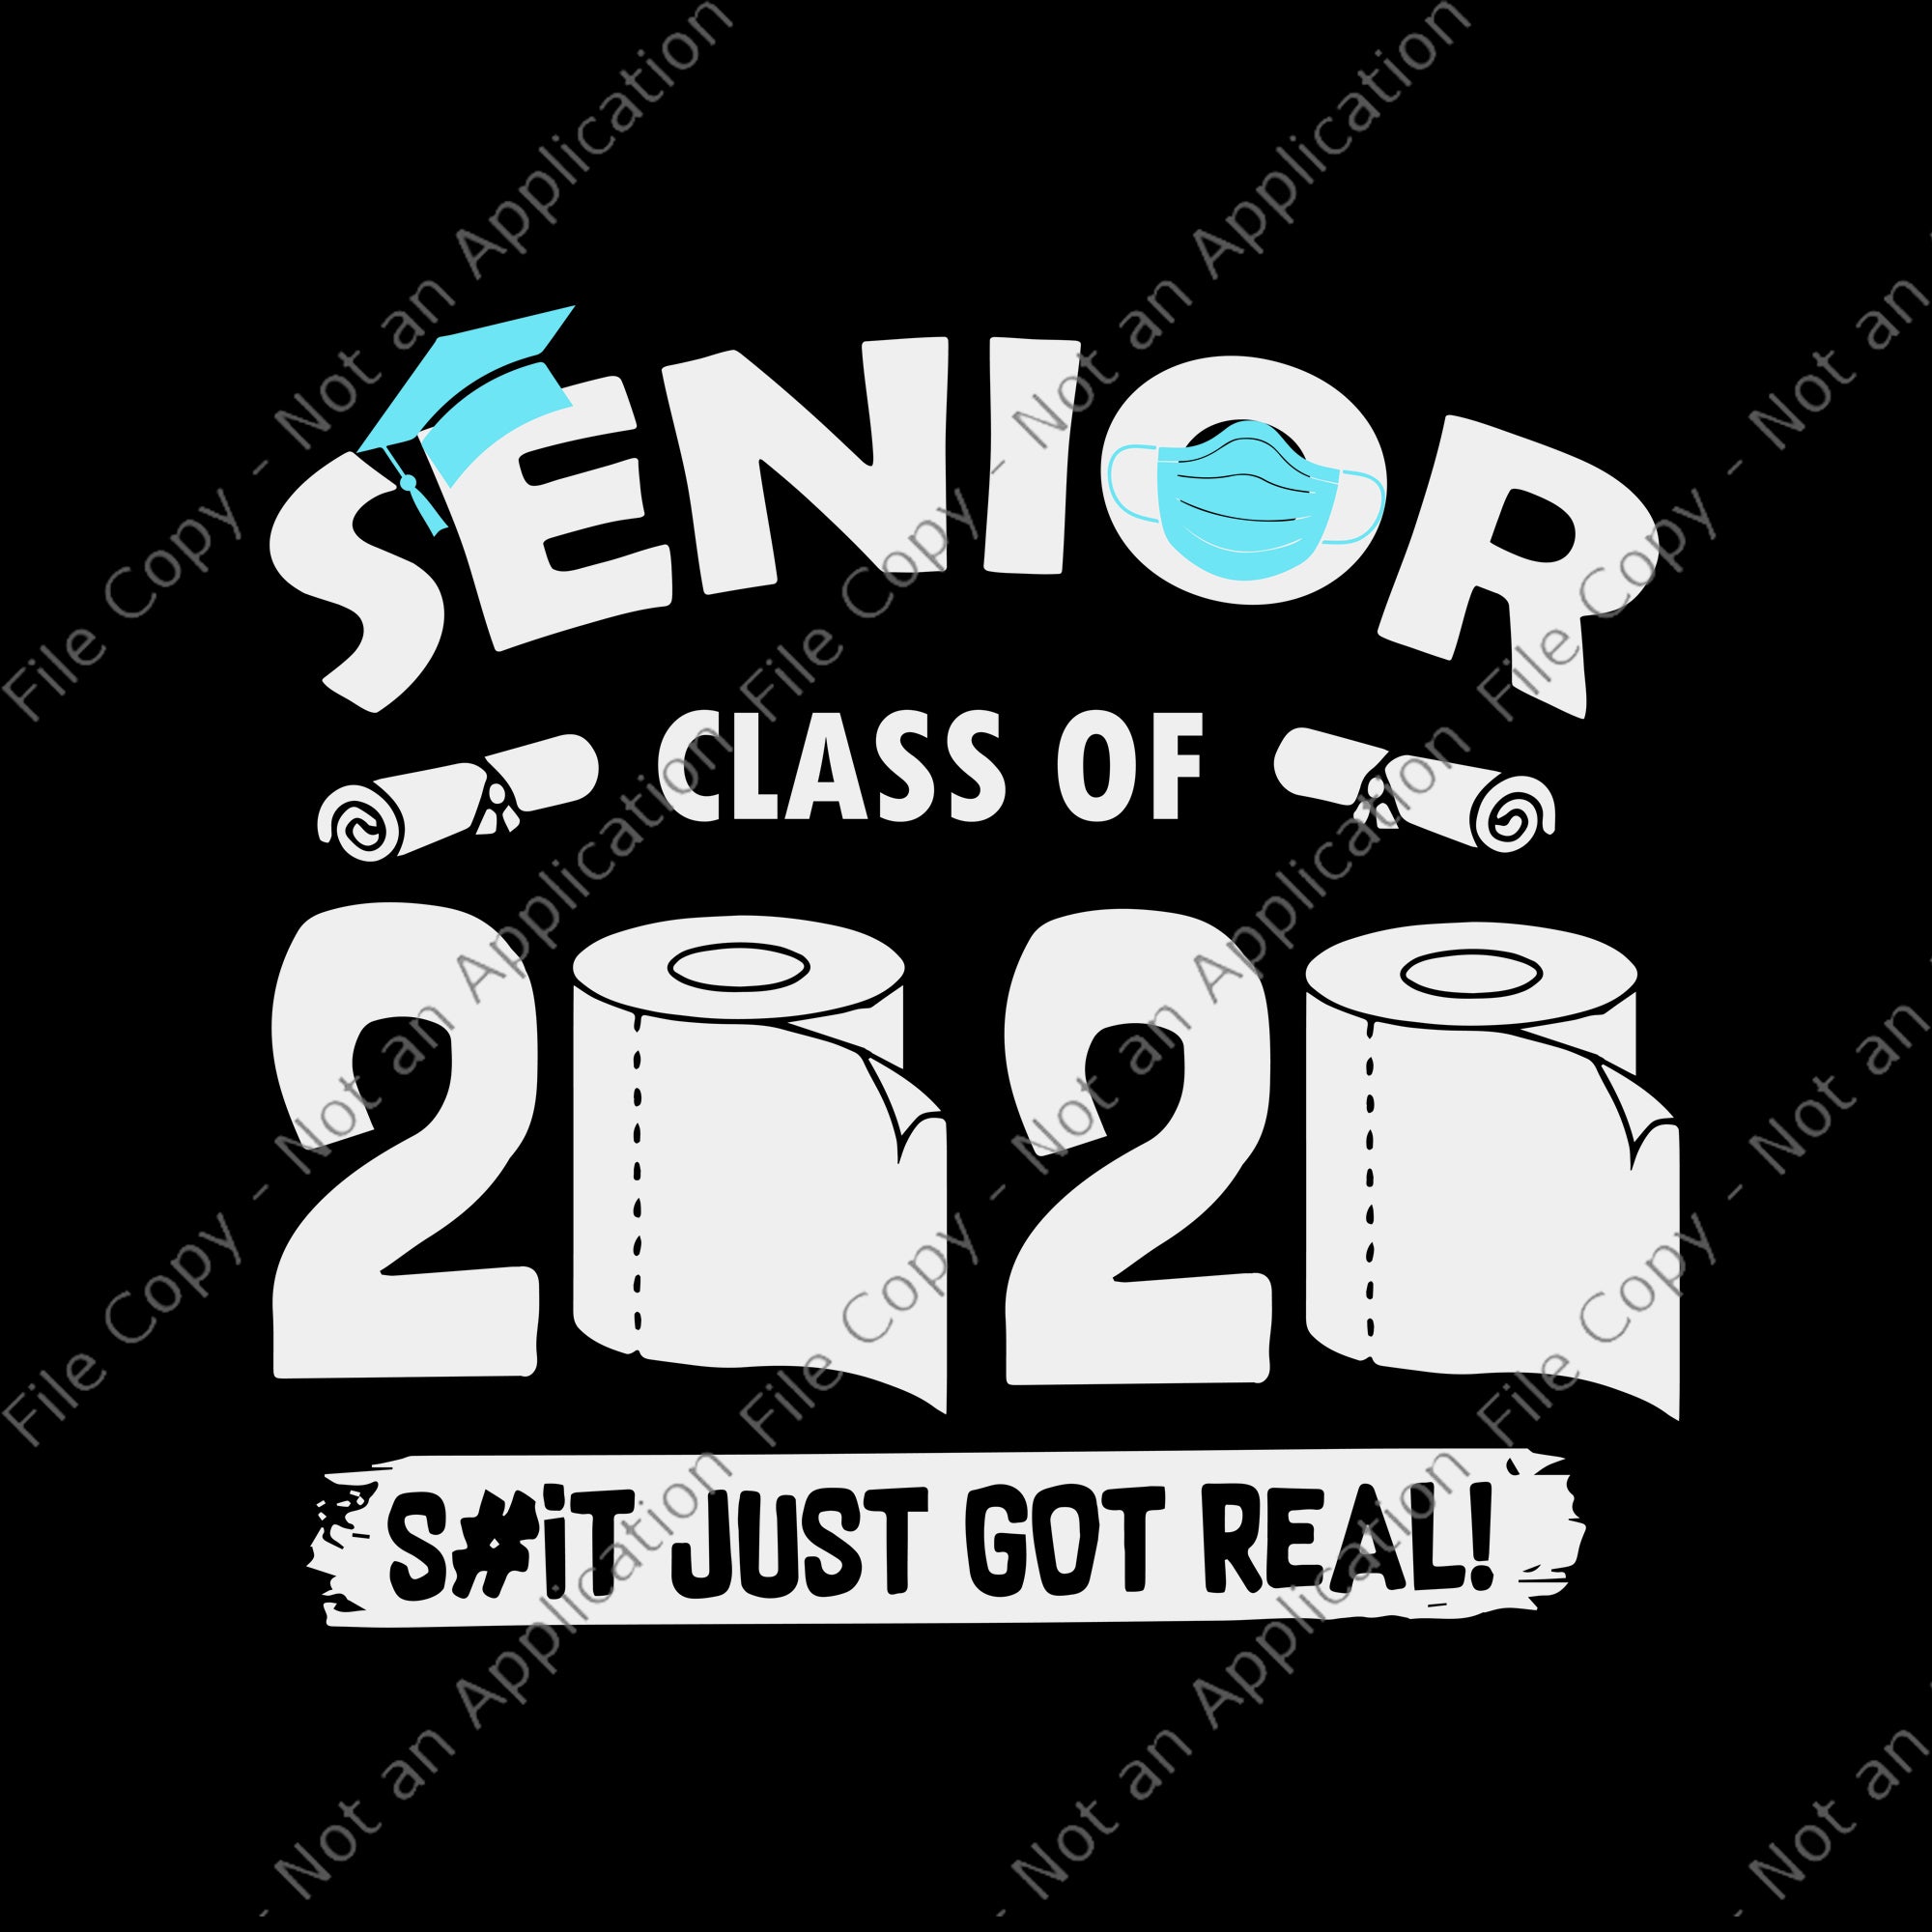 Senior class of 2020 the year when shit got real svg, senior class of 2020 the year when shit got real , senior 2020 svg, senior 2020 dxf, eps, svg file